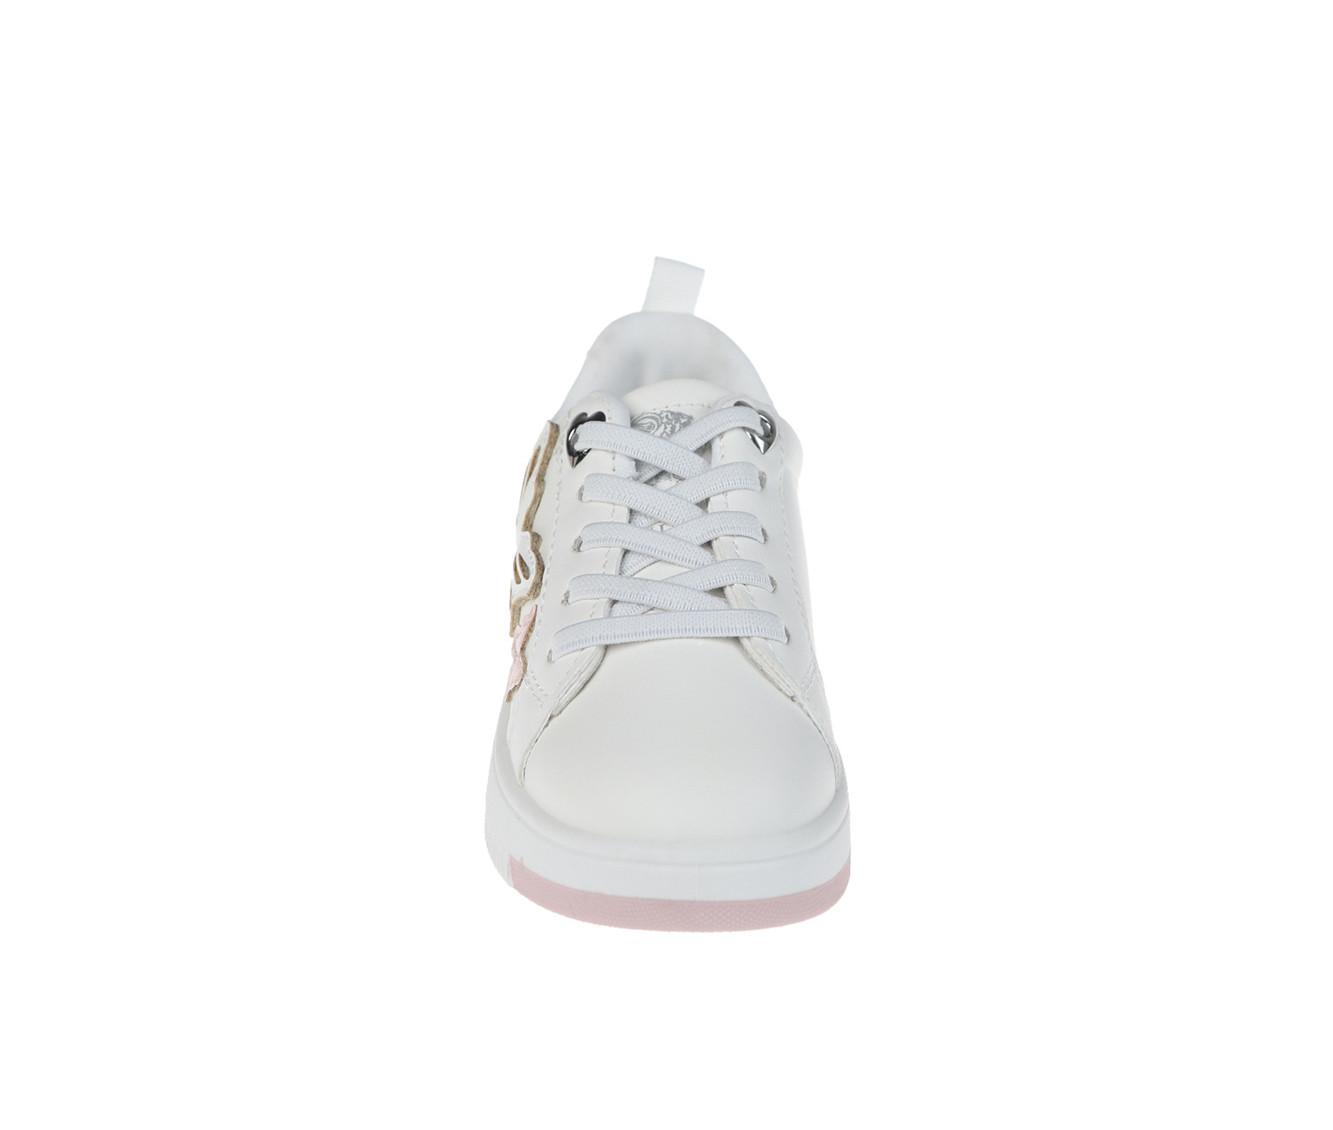 Girls' Vince Camuto Toddler Lil Sarah Fashion Sneakers